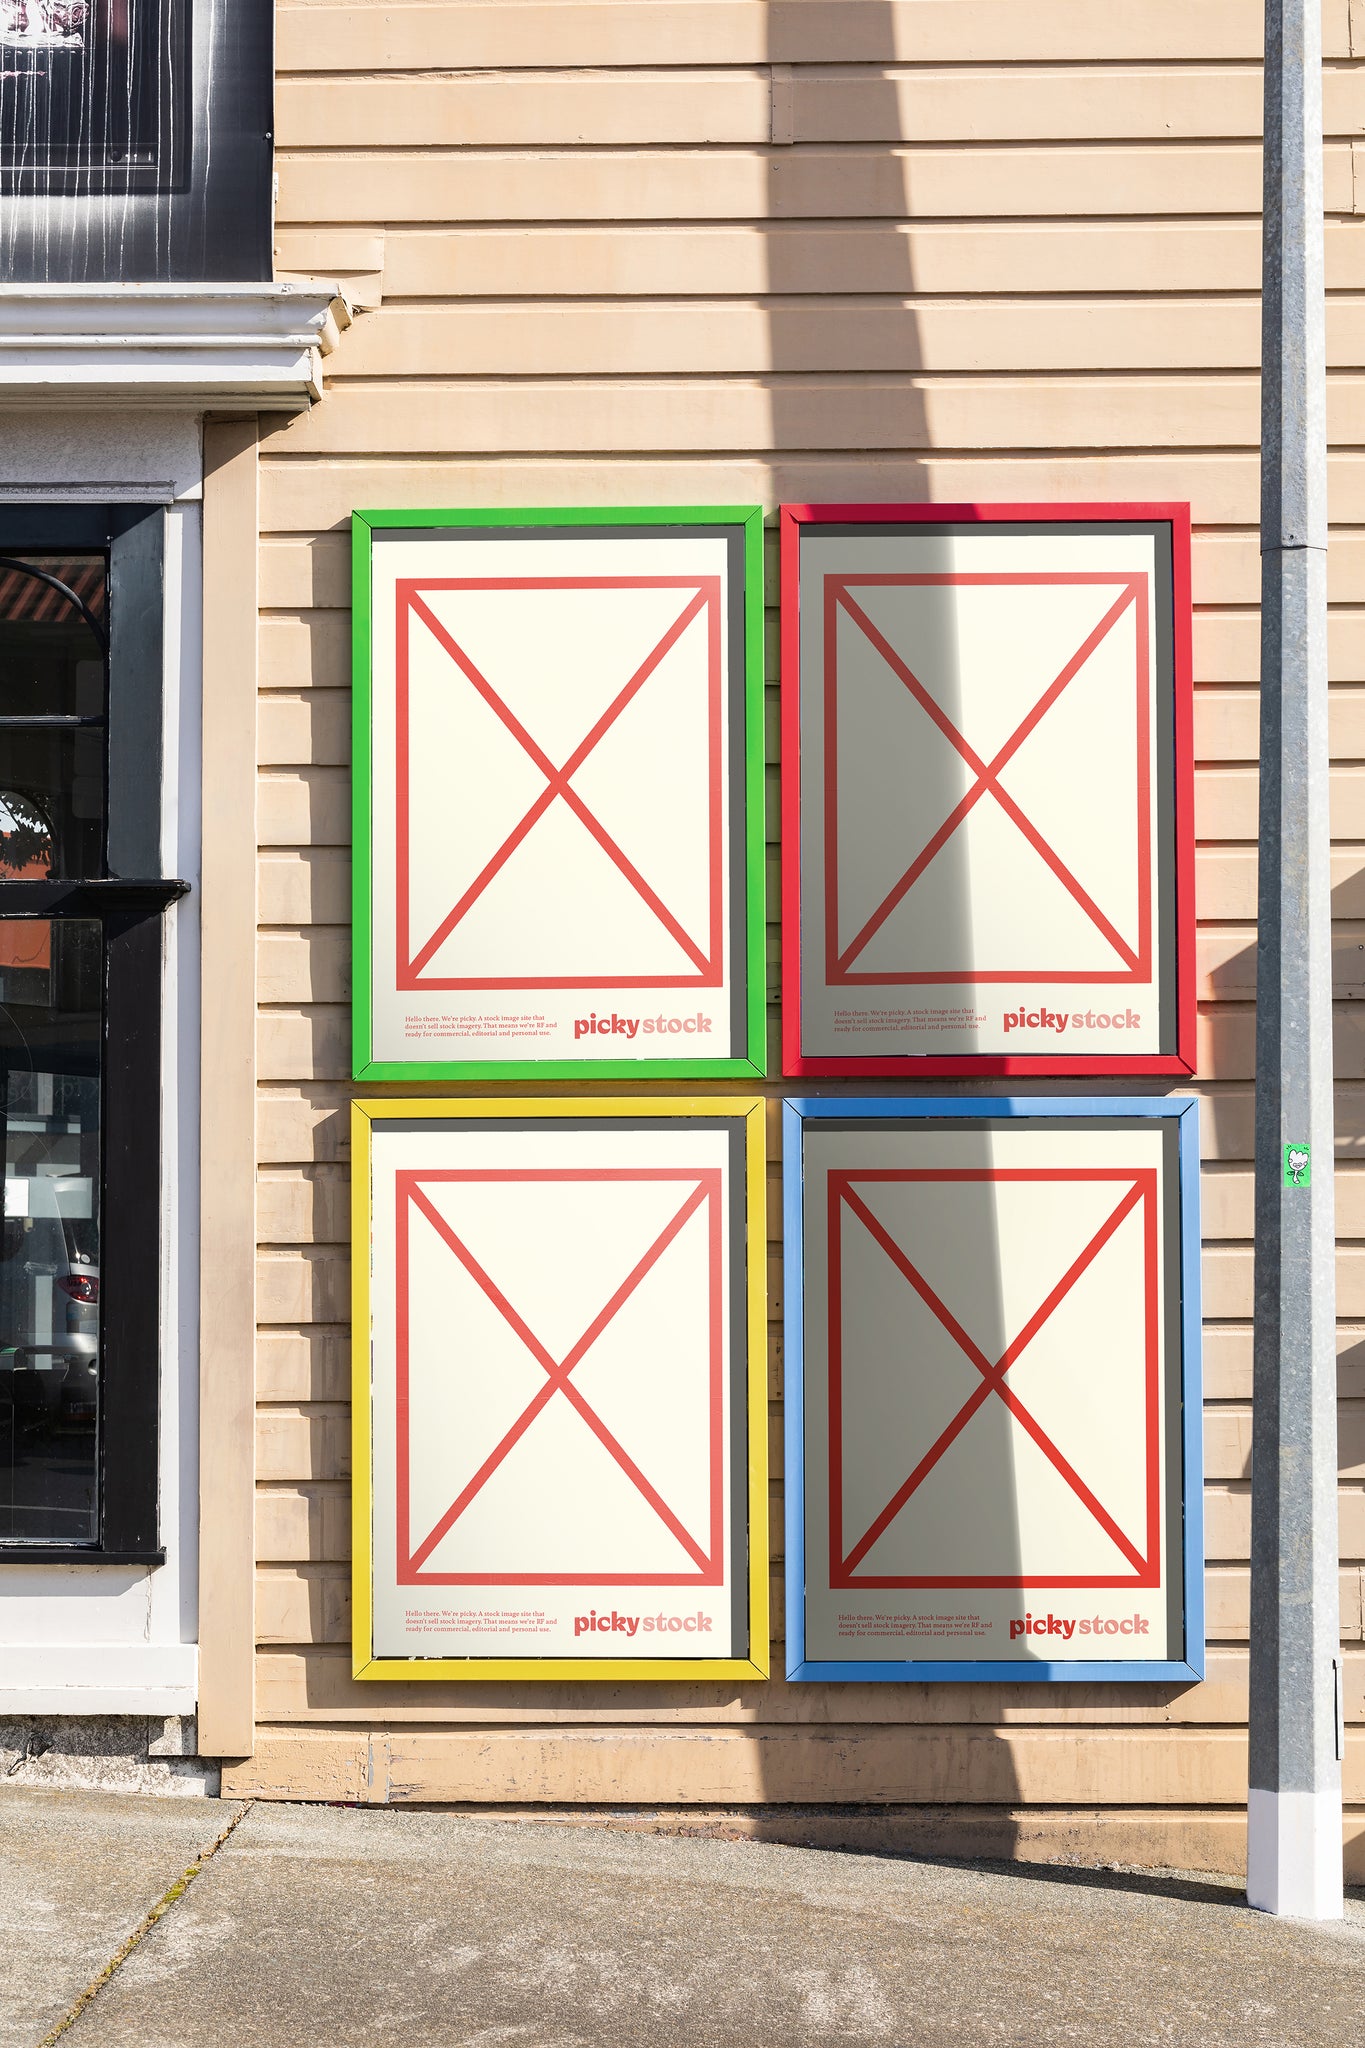 Portrait of framed advertisements on a neo victorian building the multi-colored framed held blank white and red mock advertisements with picky brand logos.